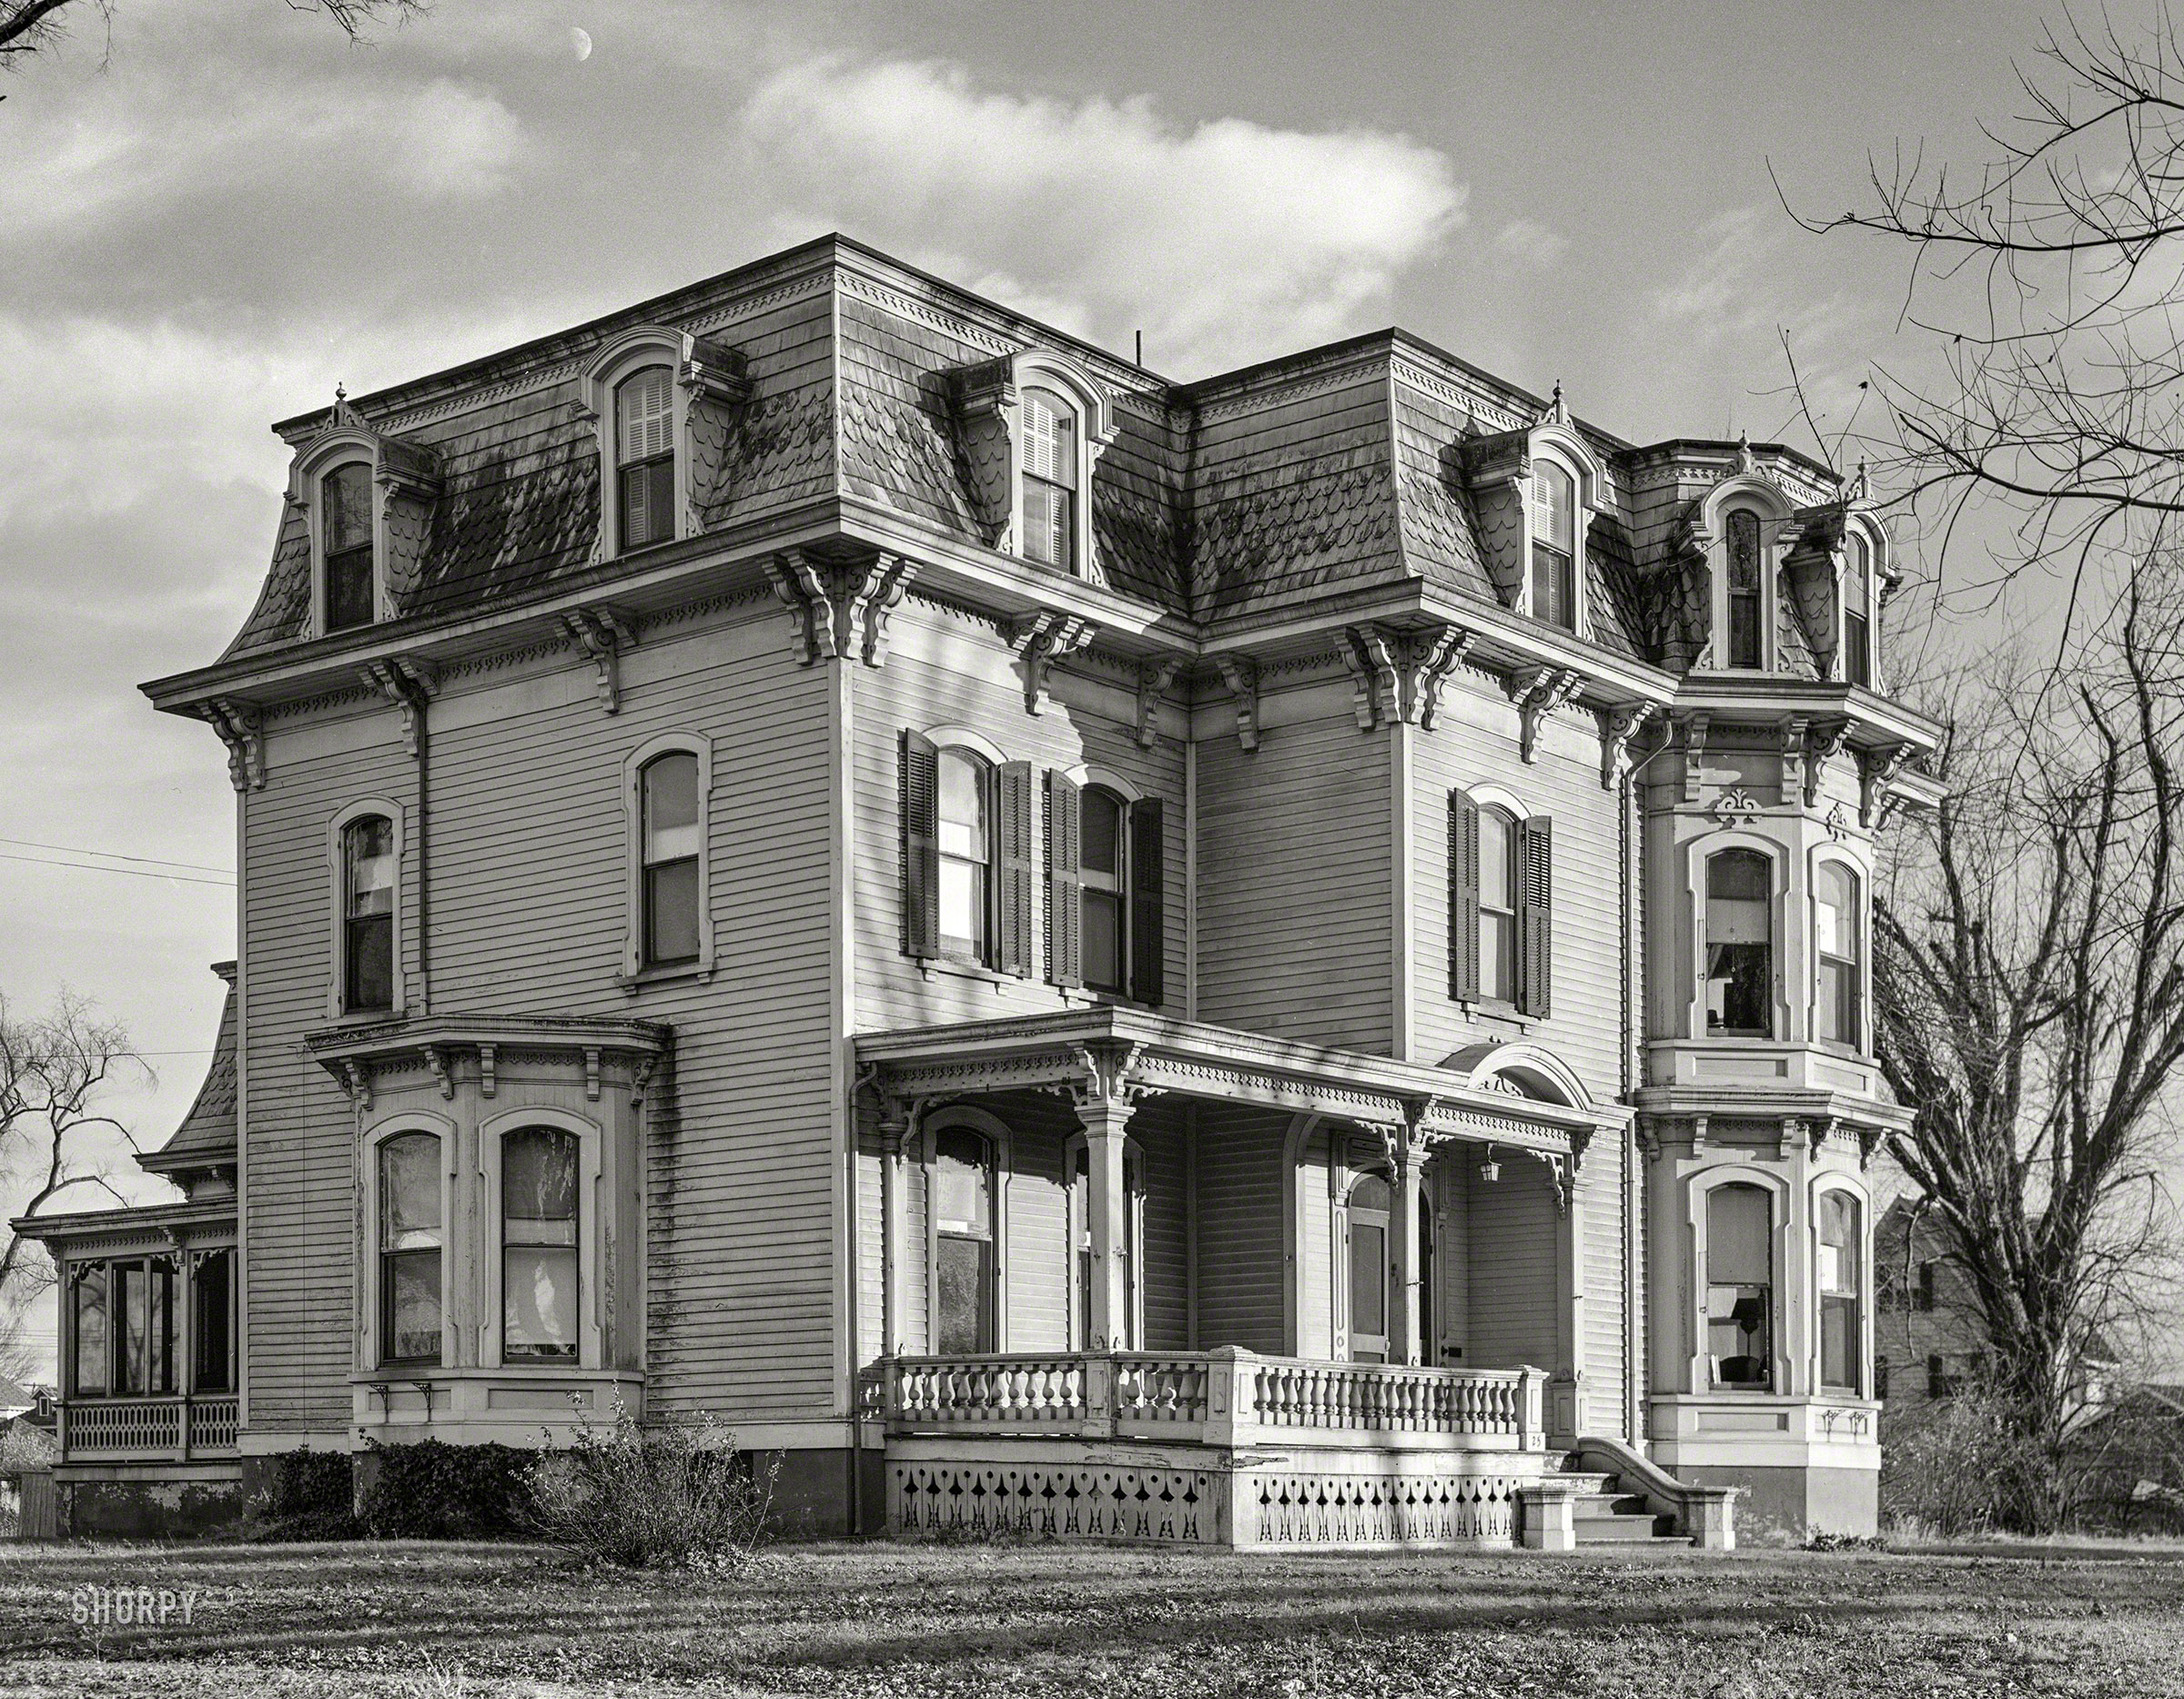 November 1940. "House, late afternoon. Mystic, Connecticut." Also a late-afternoon moon. Medium format negative by Jack Delano. View full size.